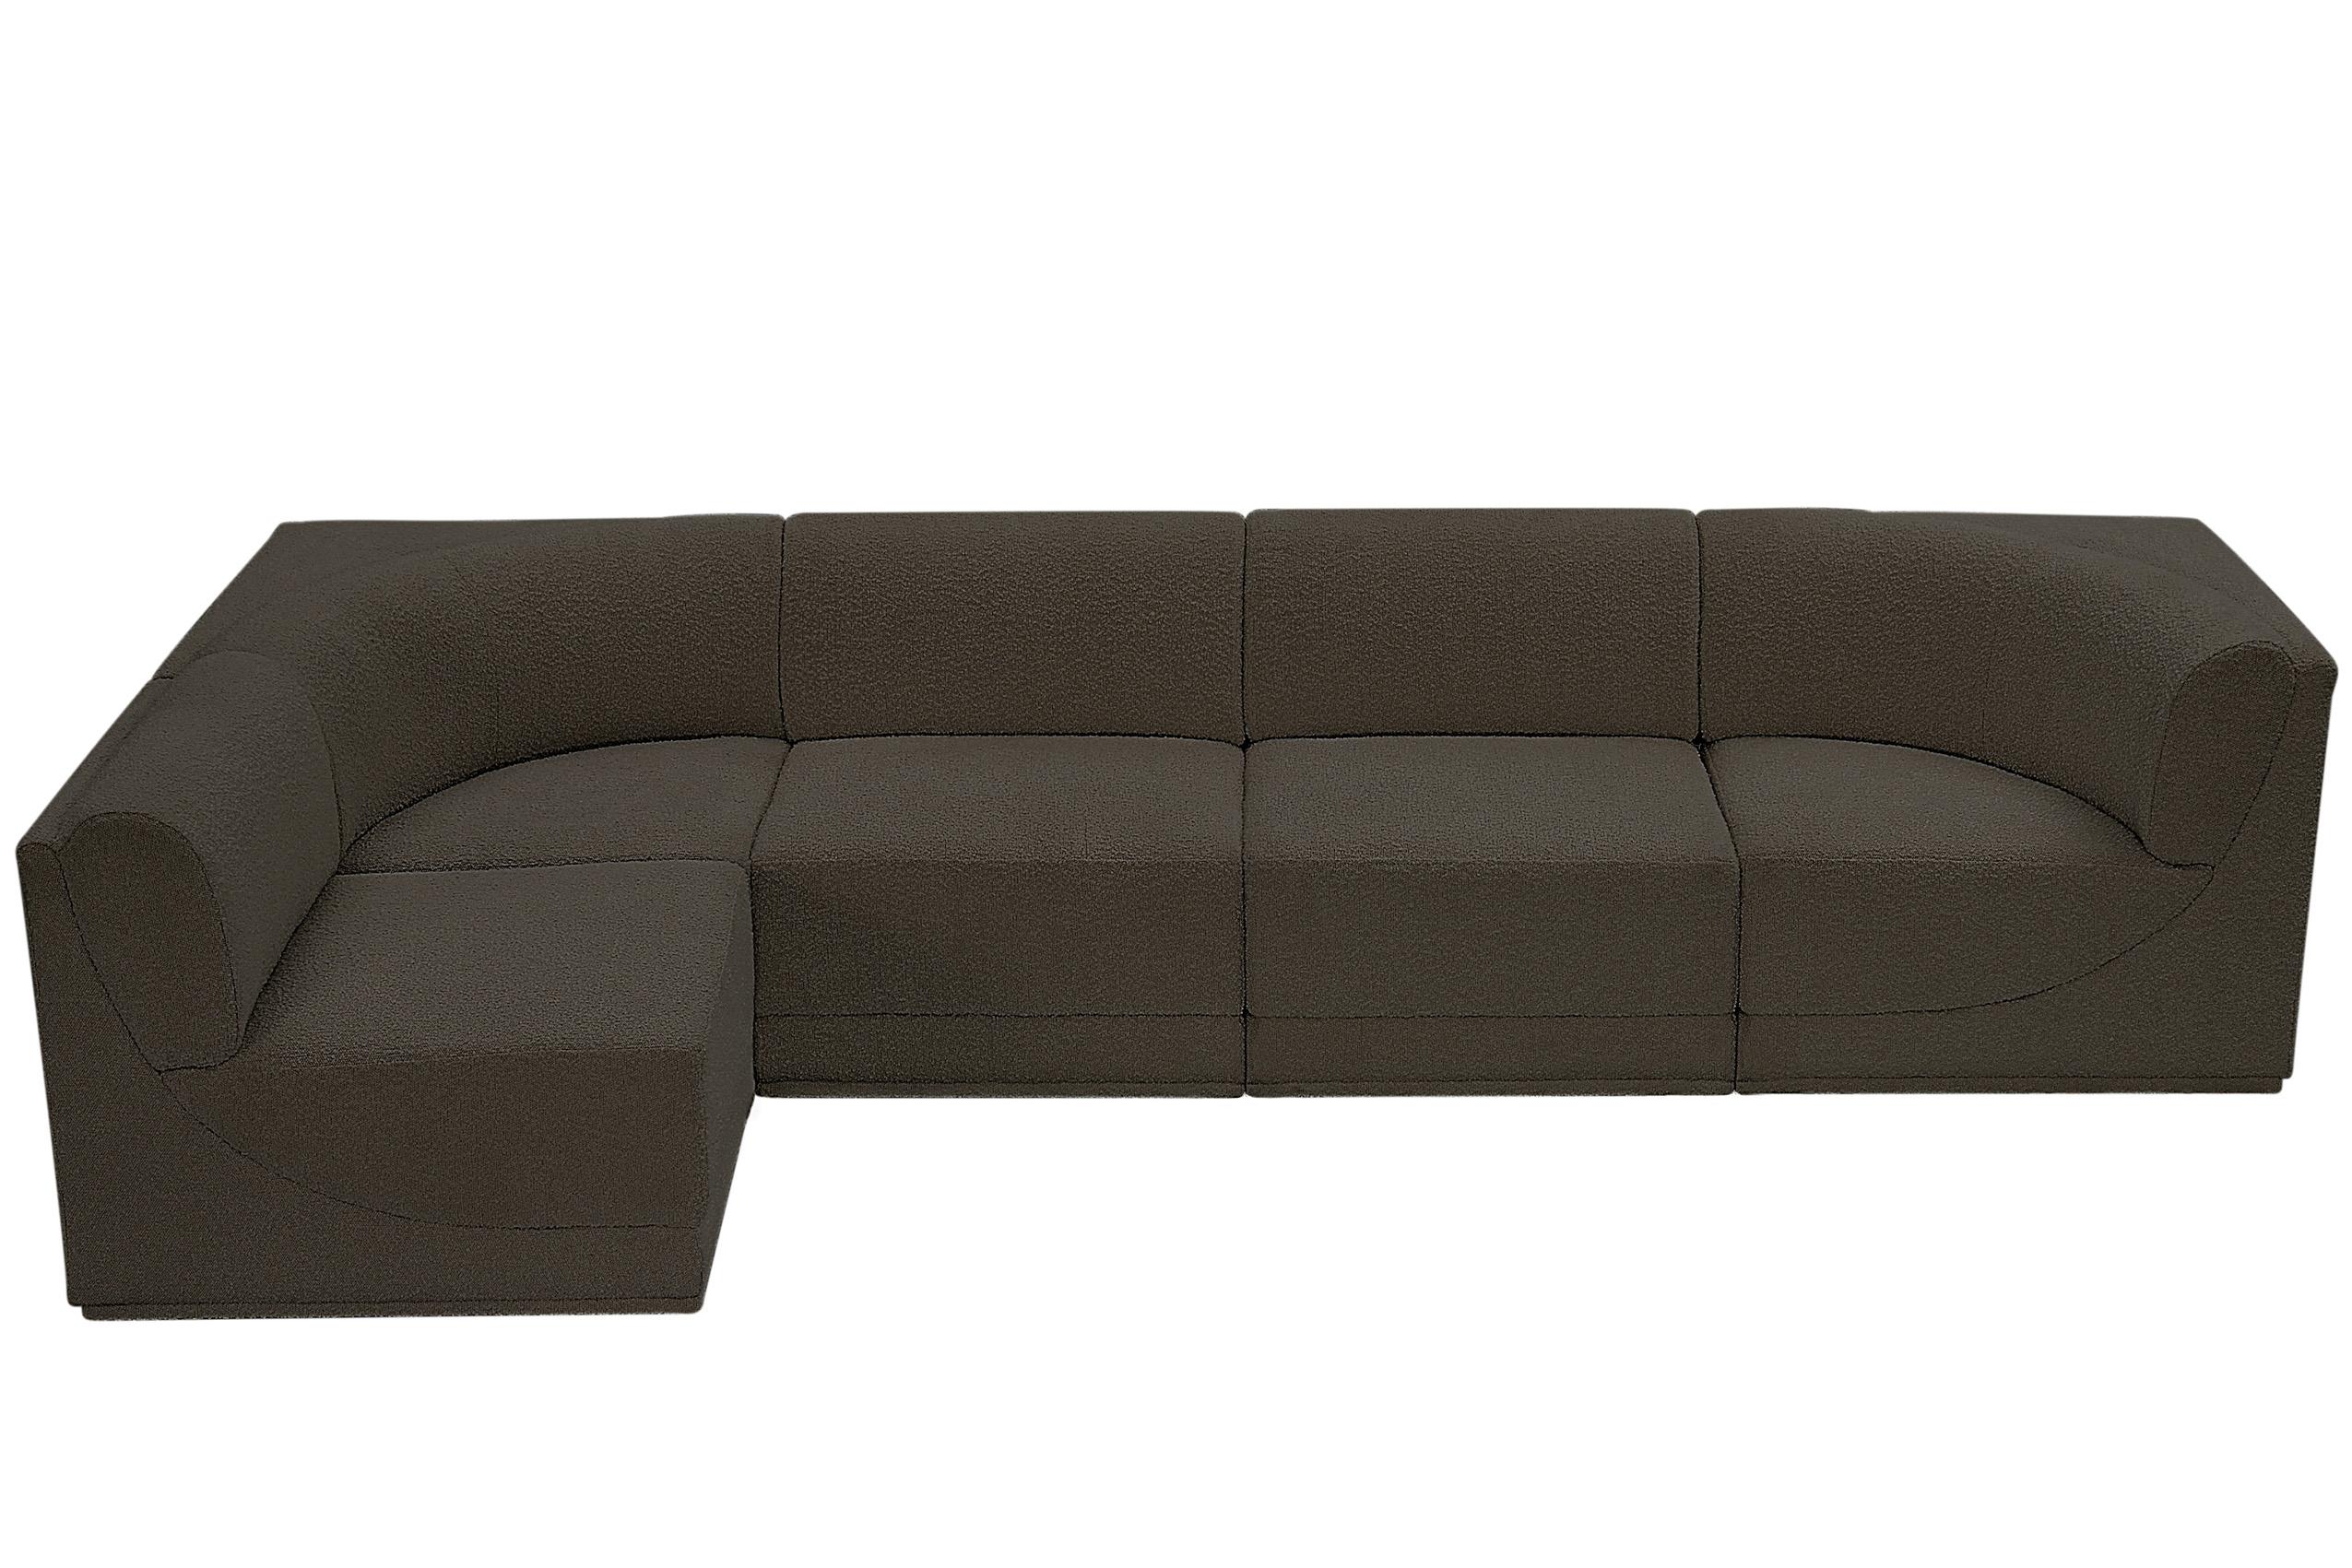 Contemporary, Modern Modular Sectional Ollie 118Brown-Sec5A 118Brown-Sec5A in Brown 